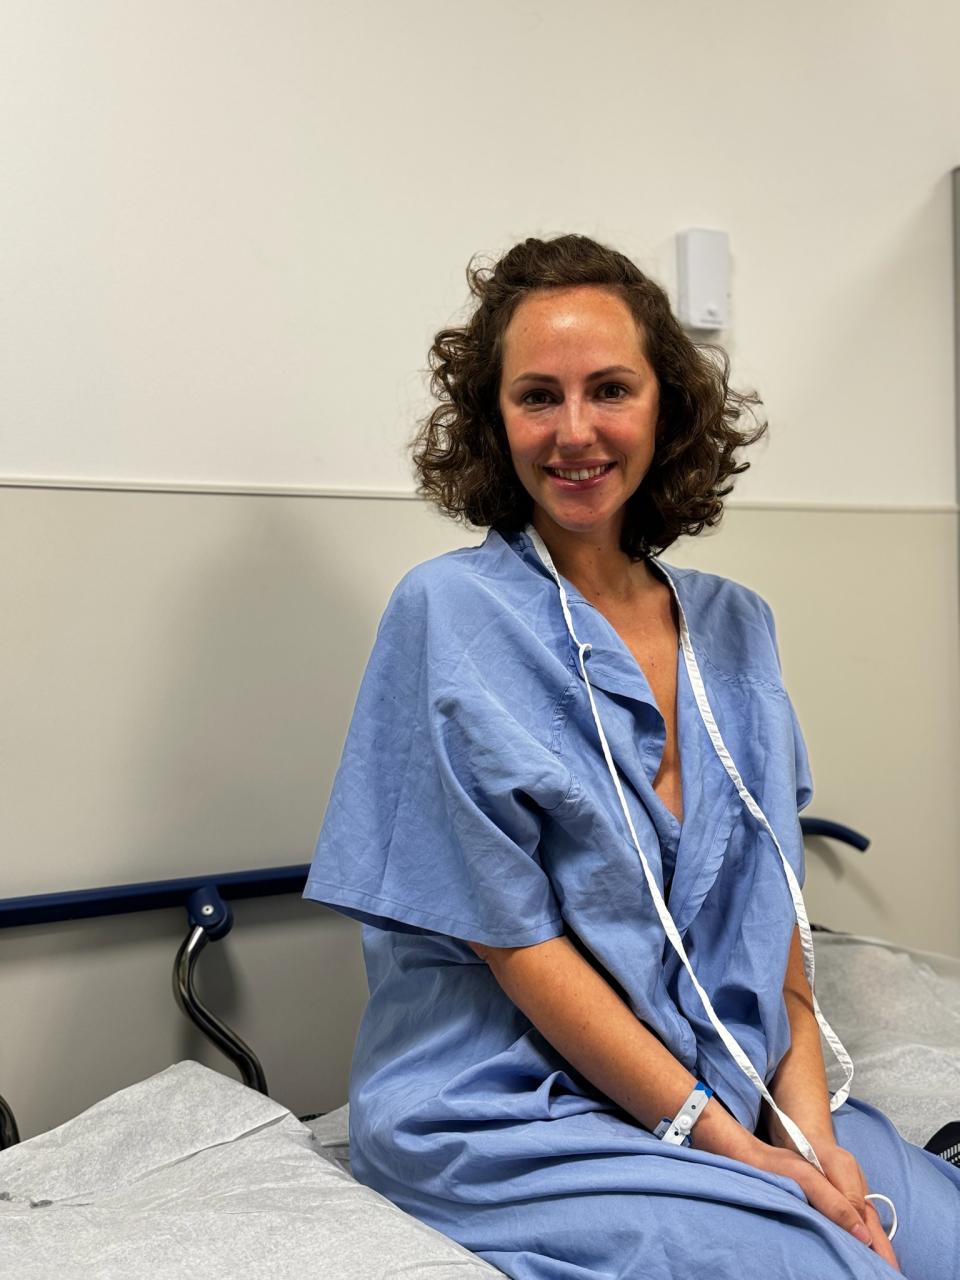 Robyn Goldman sits on a bed while wearing a blue hospital gown. (Photo provided by Robyn Goldman)